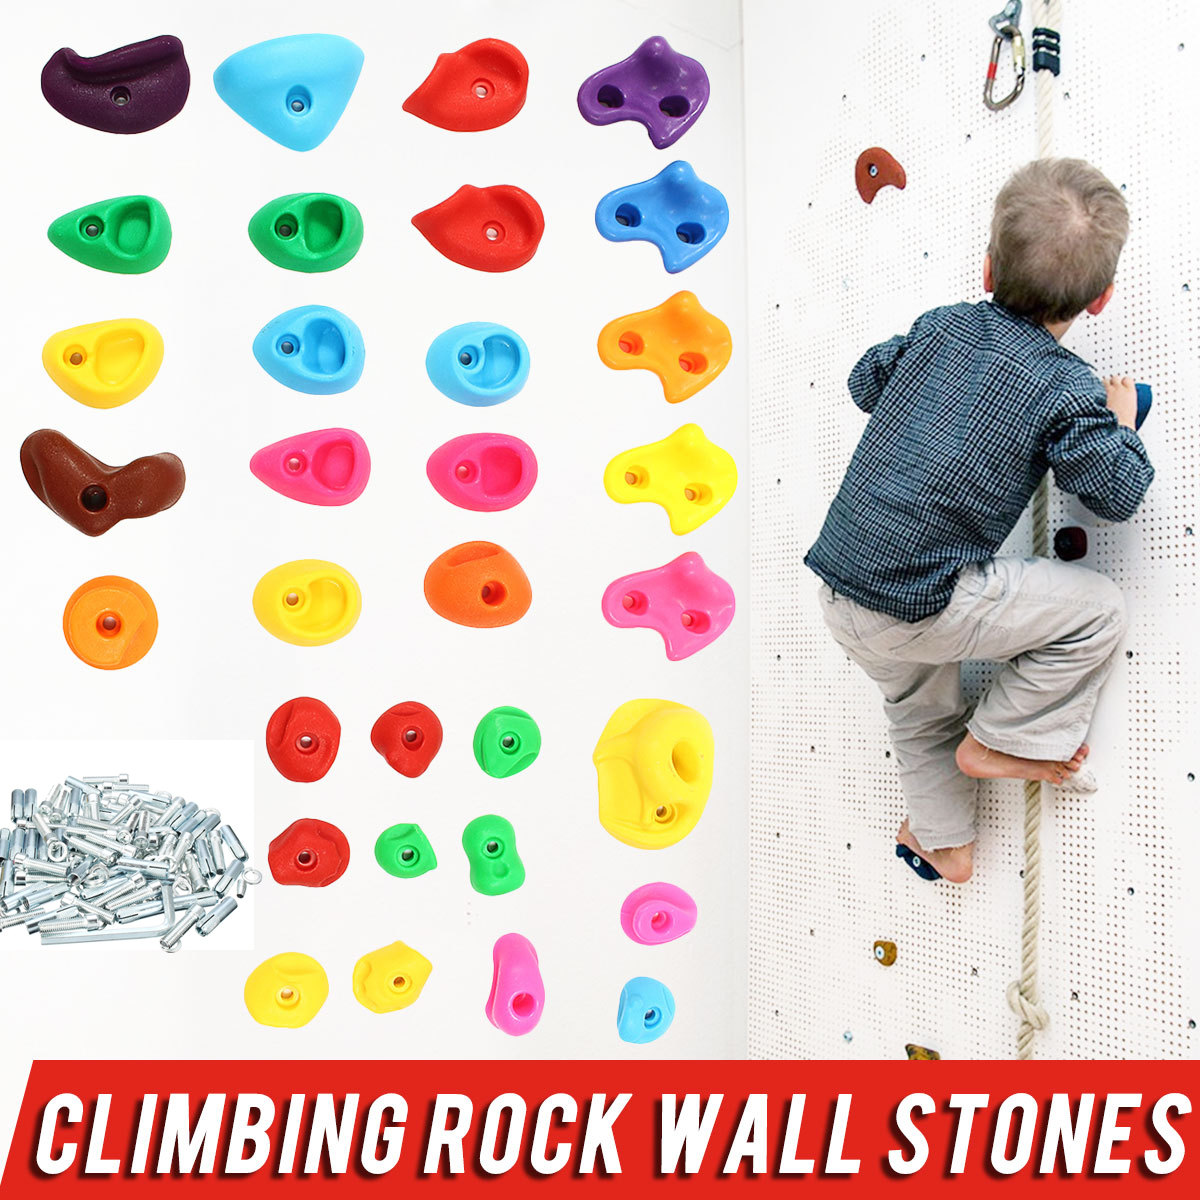 32Pcs Textured Climbing Holds Rock Wall Stones Holds Grip for Kid Indoor/Outdoos 